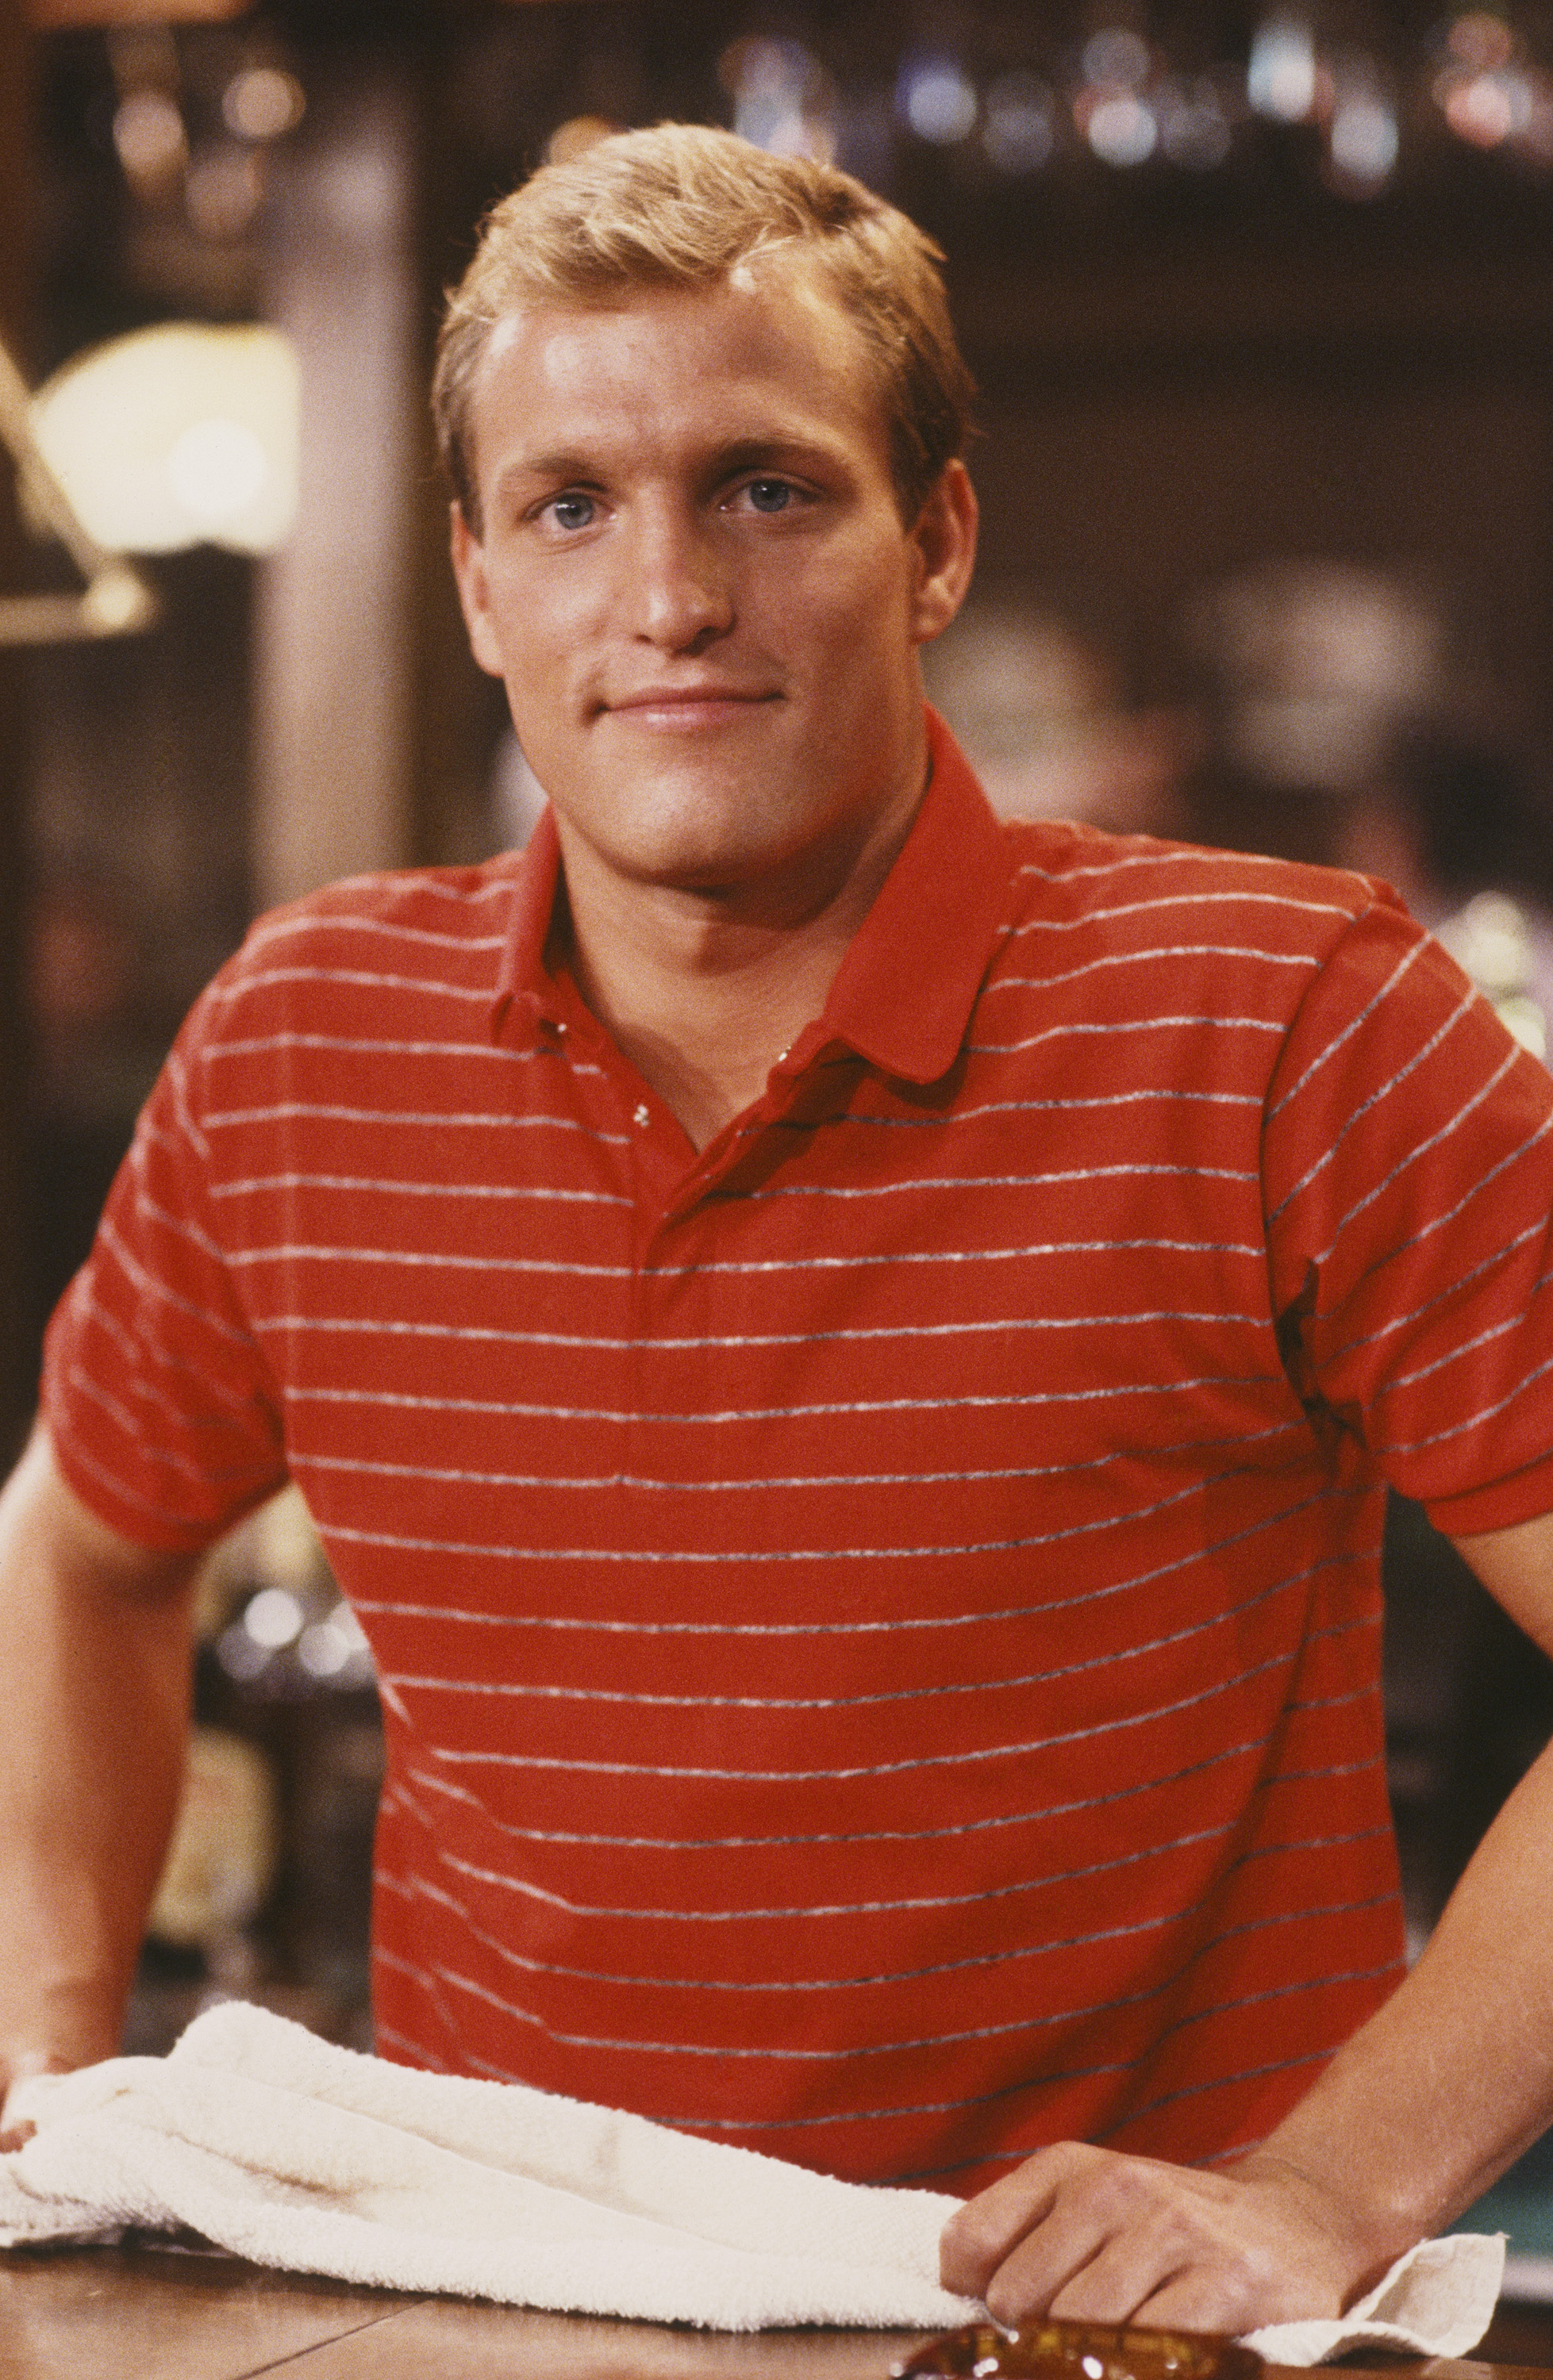 Woody Harrelson als Woody Boyd in "Woody Goes Belly Up" Episode 2 im Jahr 1985. | Quelle: Getty Images